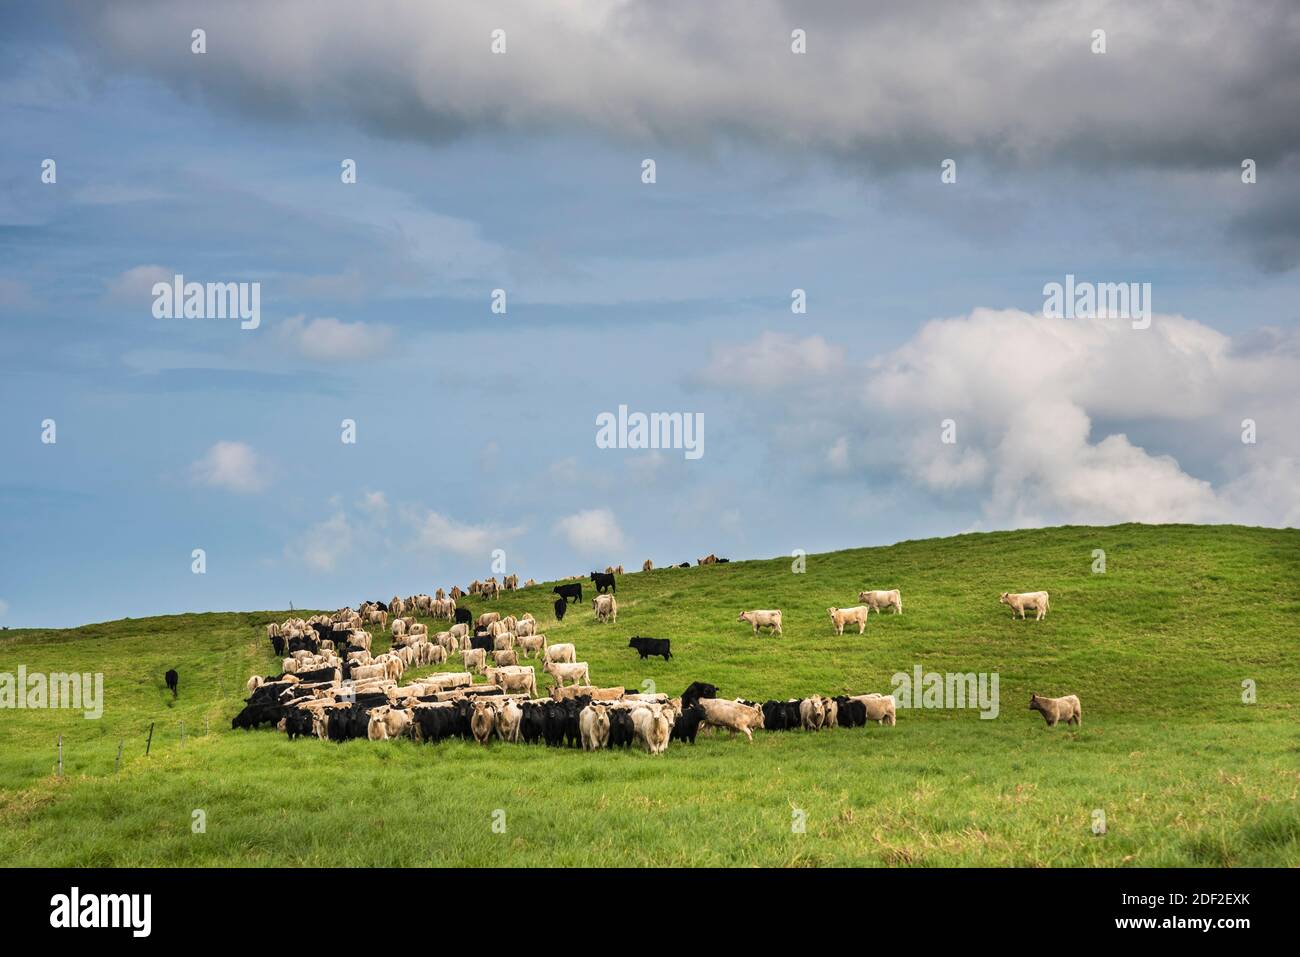 Cattle in pasture, Mana Road, Parker Ranch, Big Island of Hawaii. Stock Photo